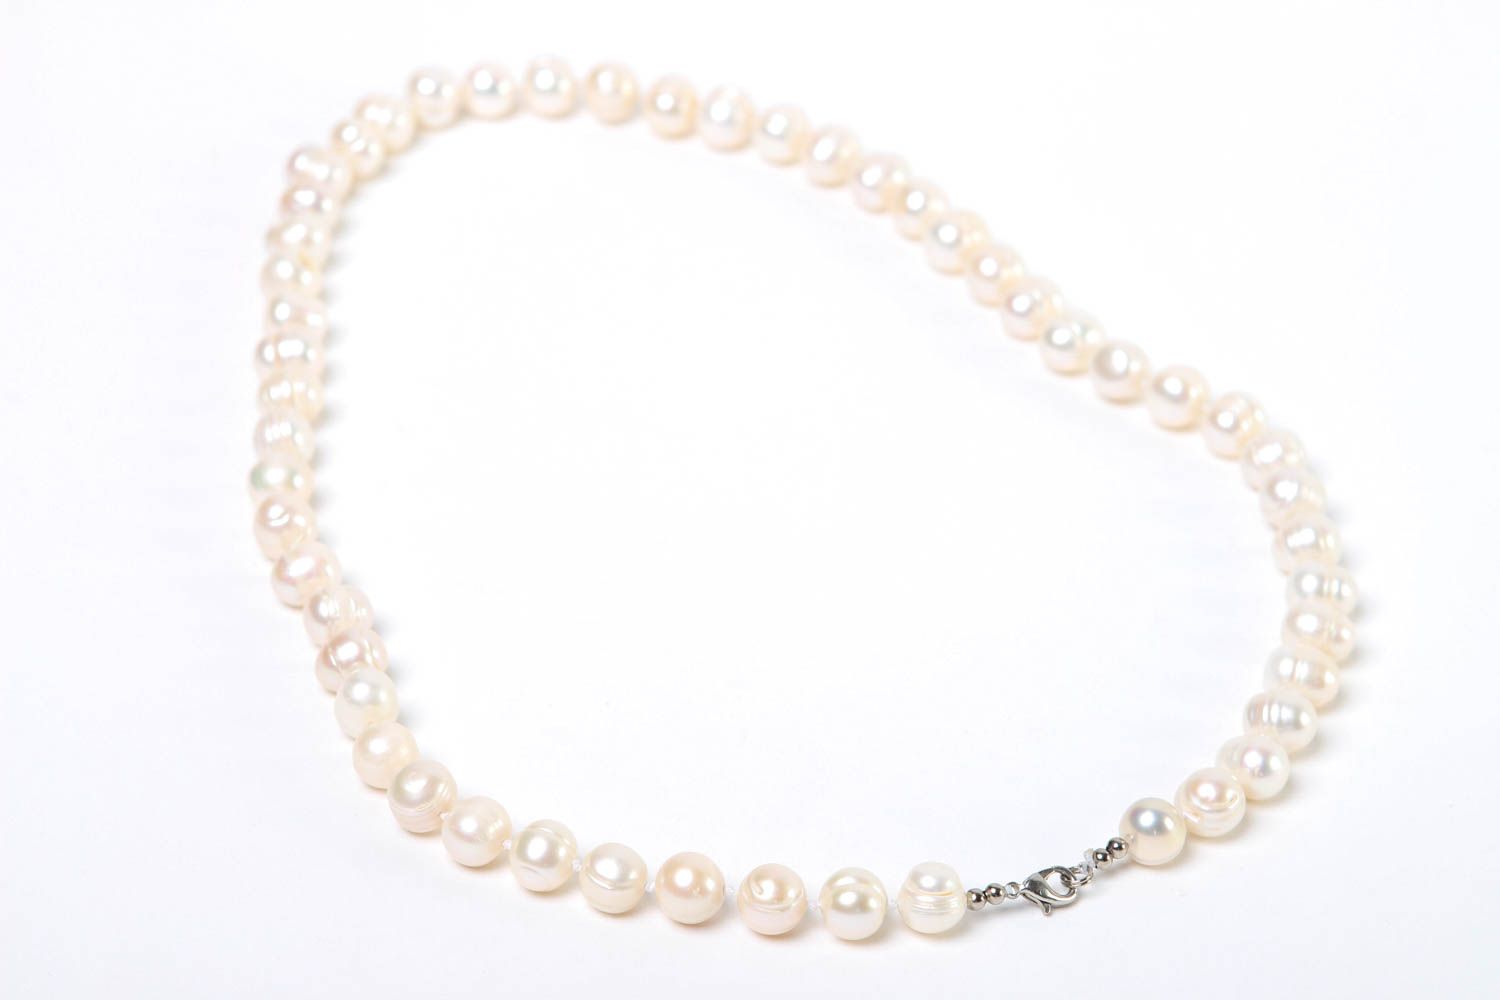 Handmade necklace pearl necklace designer jewelry womens accessories gift ideas photo 4